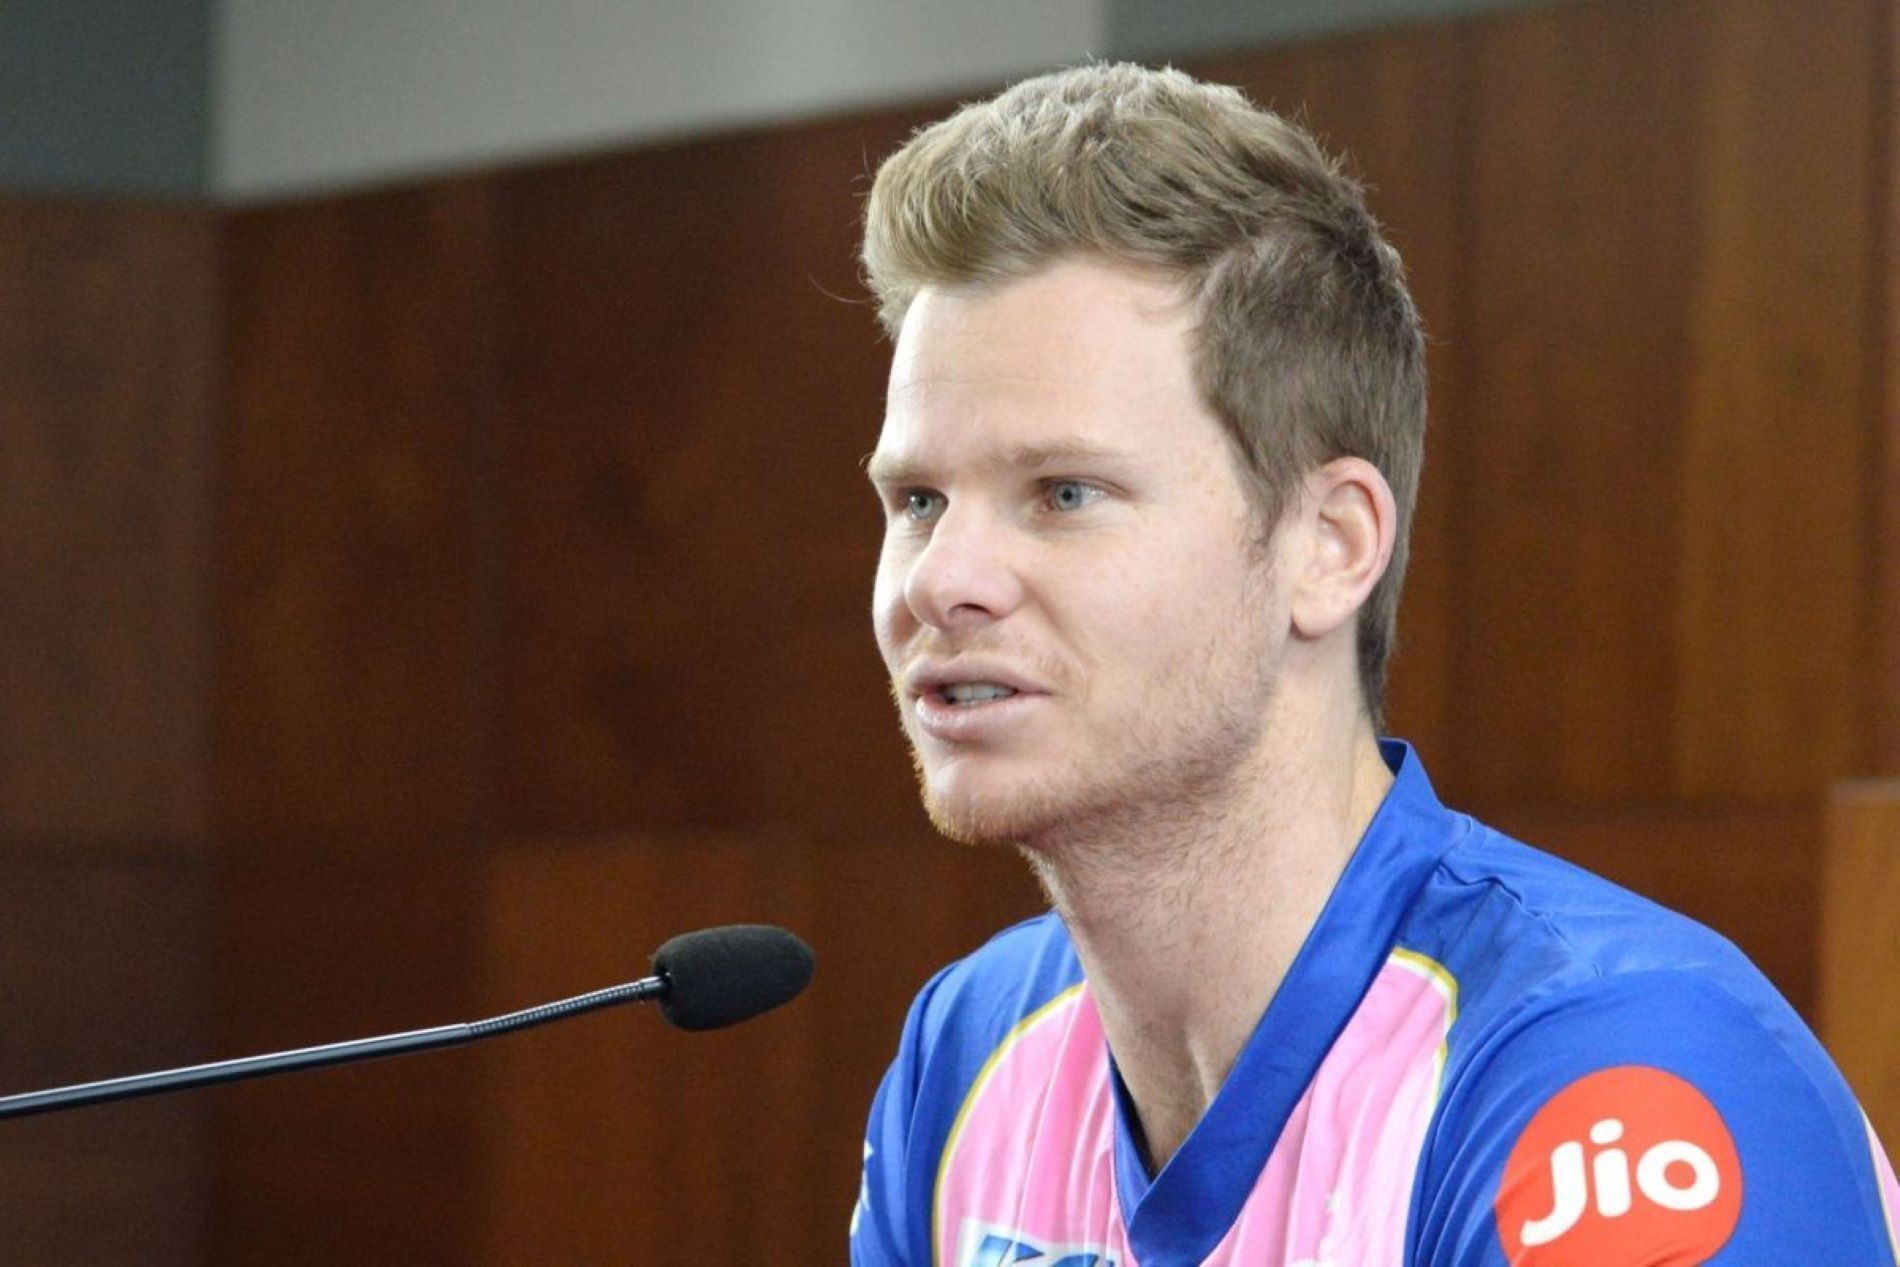 Steve Smith will be seen in the commentary box in IPL 2023